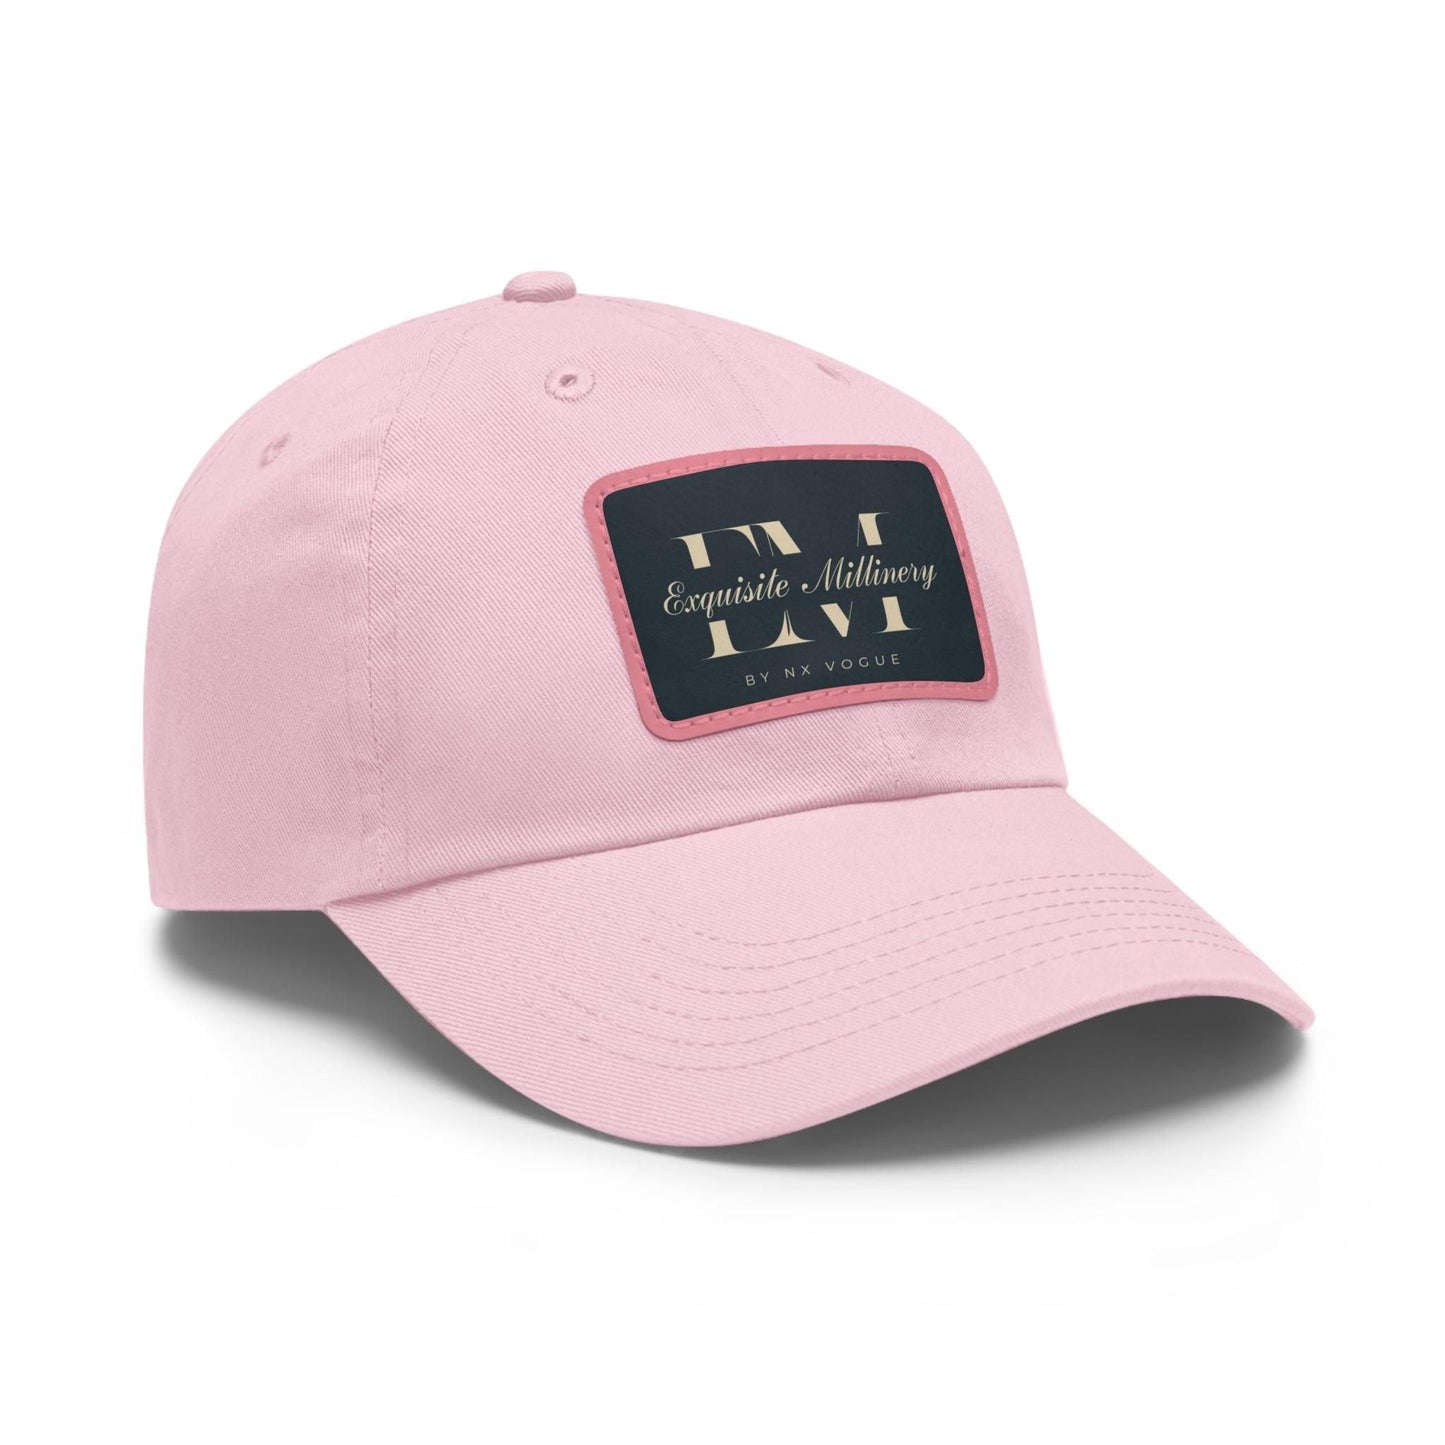 Exquisite Millinery Baseball Cap with Leather Patch Cap Light Pink / Pink patch Rectangle One size